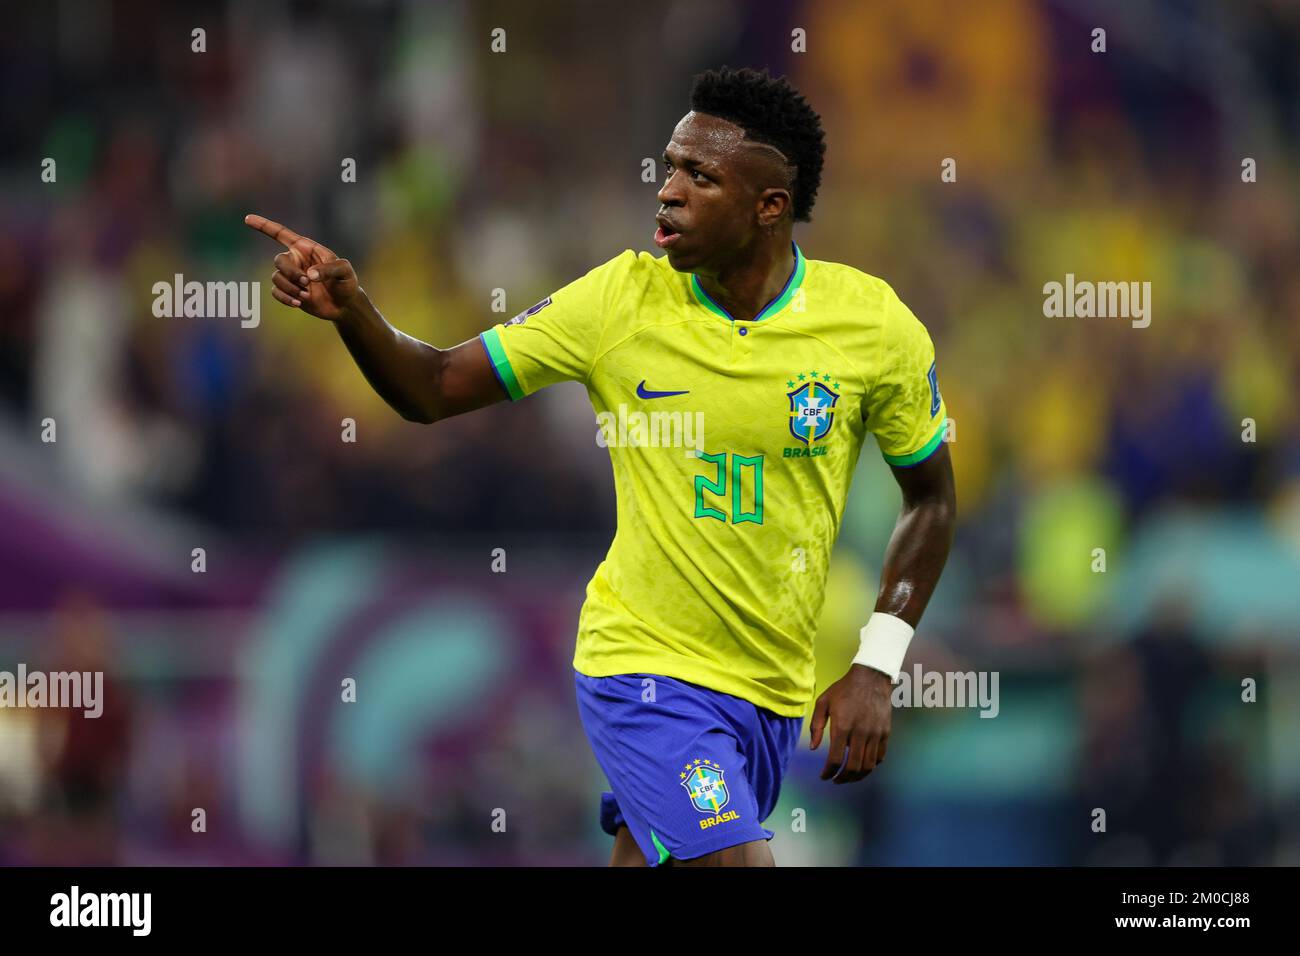 Doha, Qatar. 05th Dec, 2022. Vinicius Junior Brazil player during a match against South Korea valid for the round of 16 of the FIFA World Cup in Qatar at Stadium 974 on December 05, 2022 in Doha, Qatar. Photo:William Volcov Credit: Brazil Photo Press/Alamy Live News Stock Photo